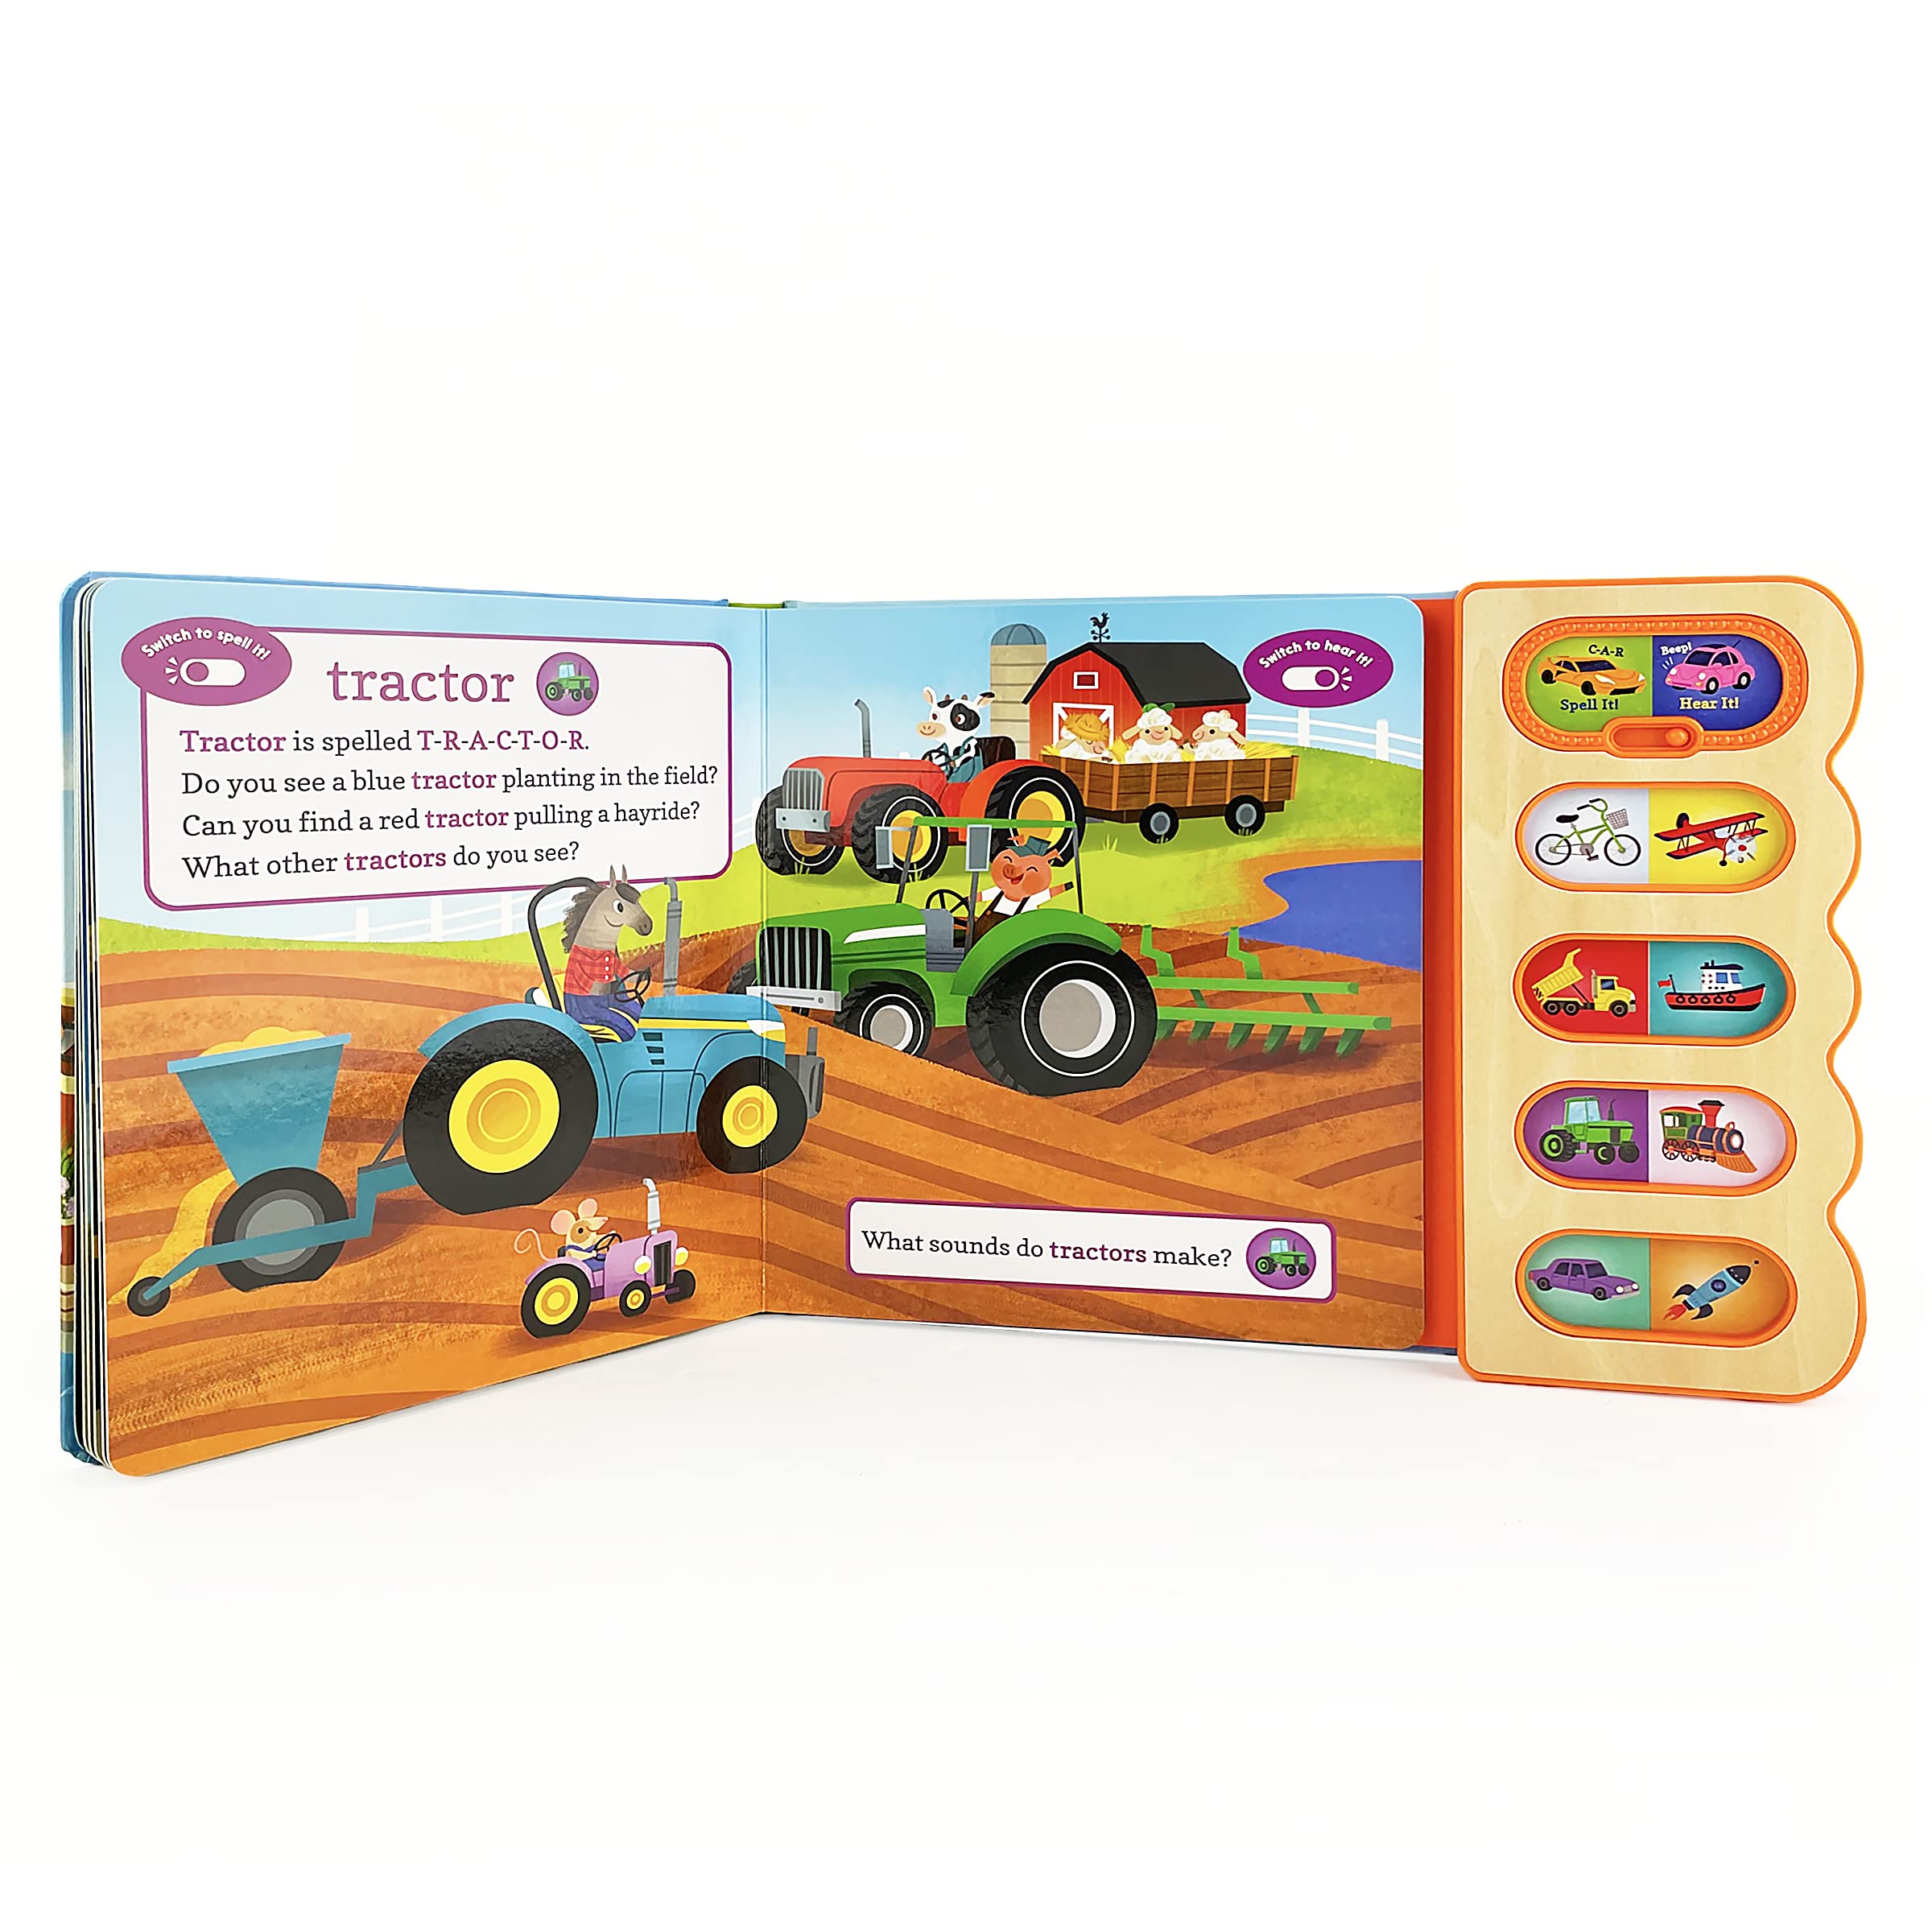 Things That Go - Hear-It/Spell-It Children's Vehicle Sound Book for Toddler (Early Bird Sound Books)